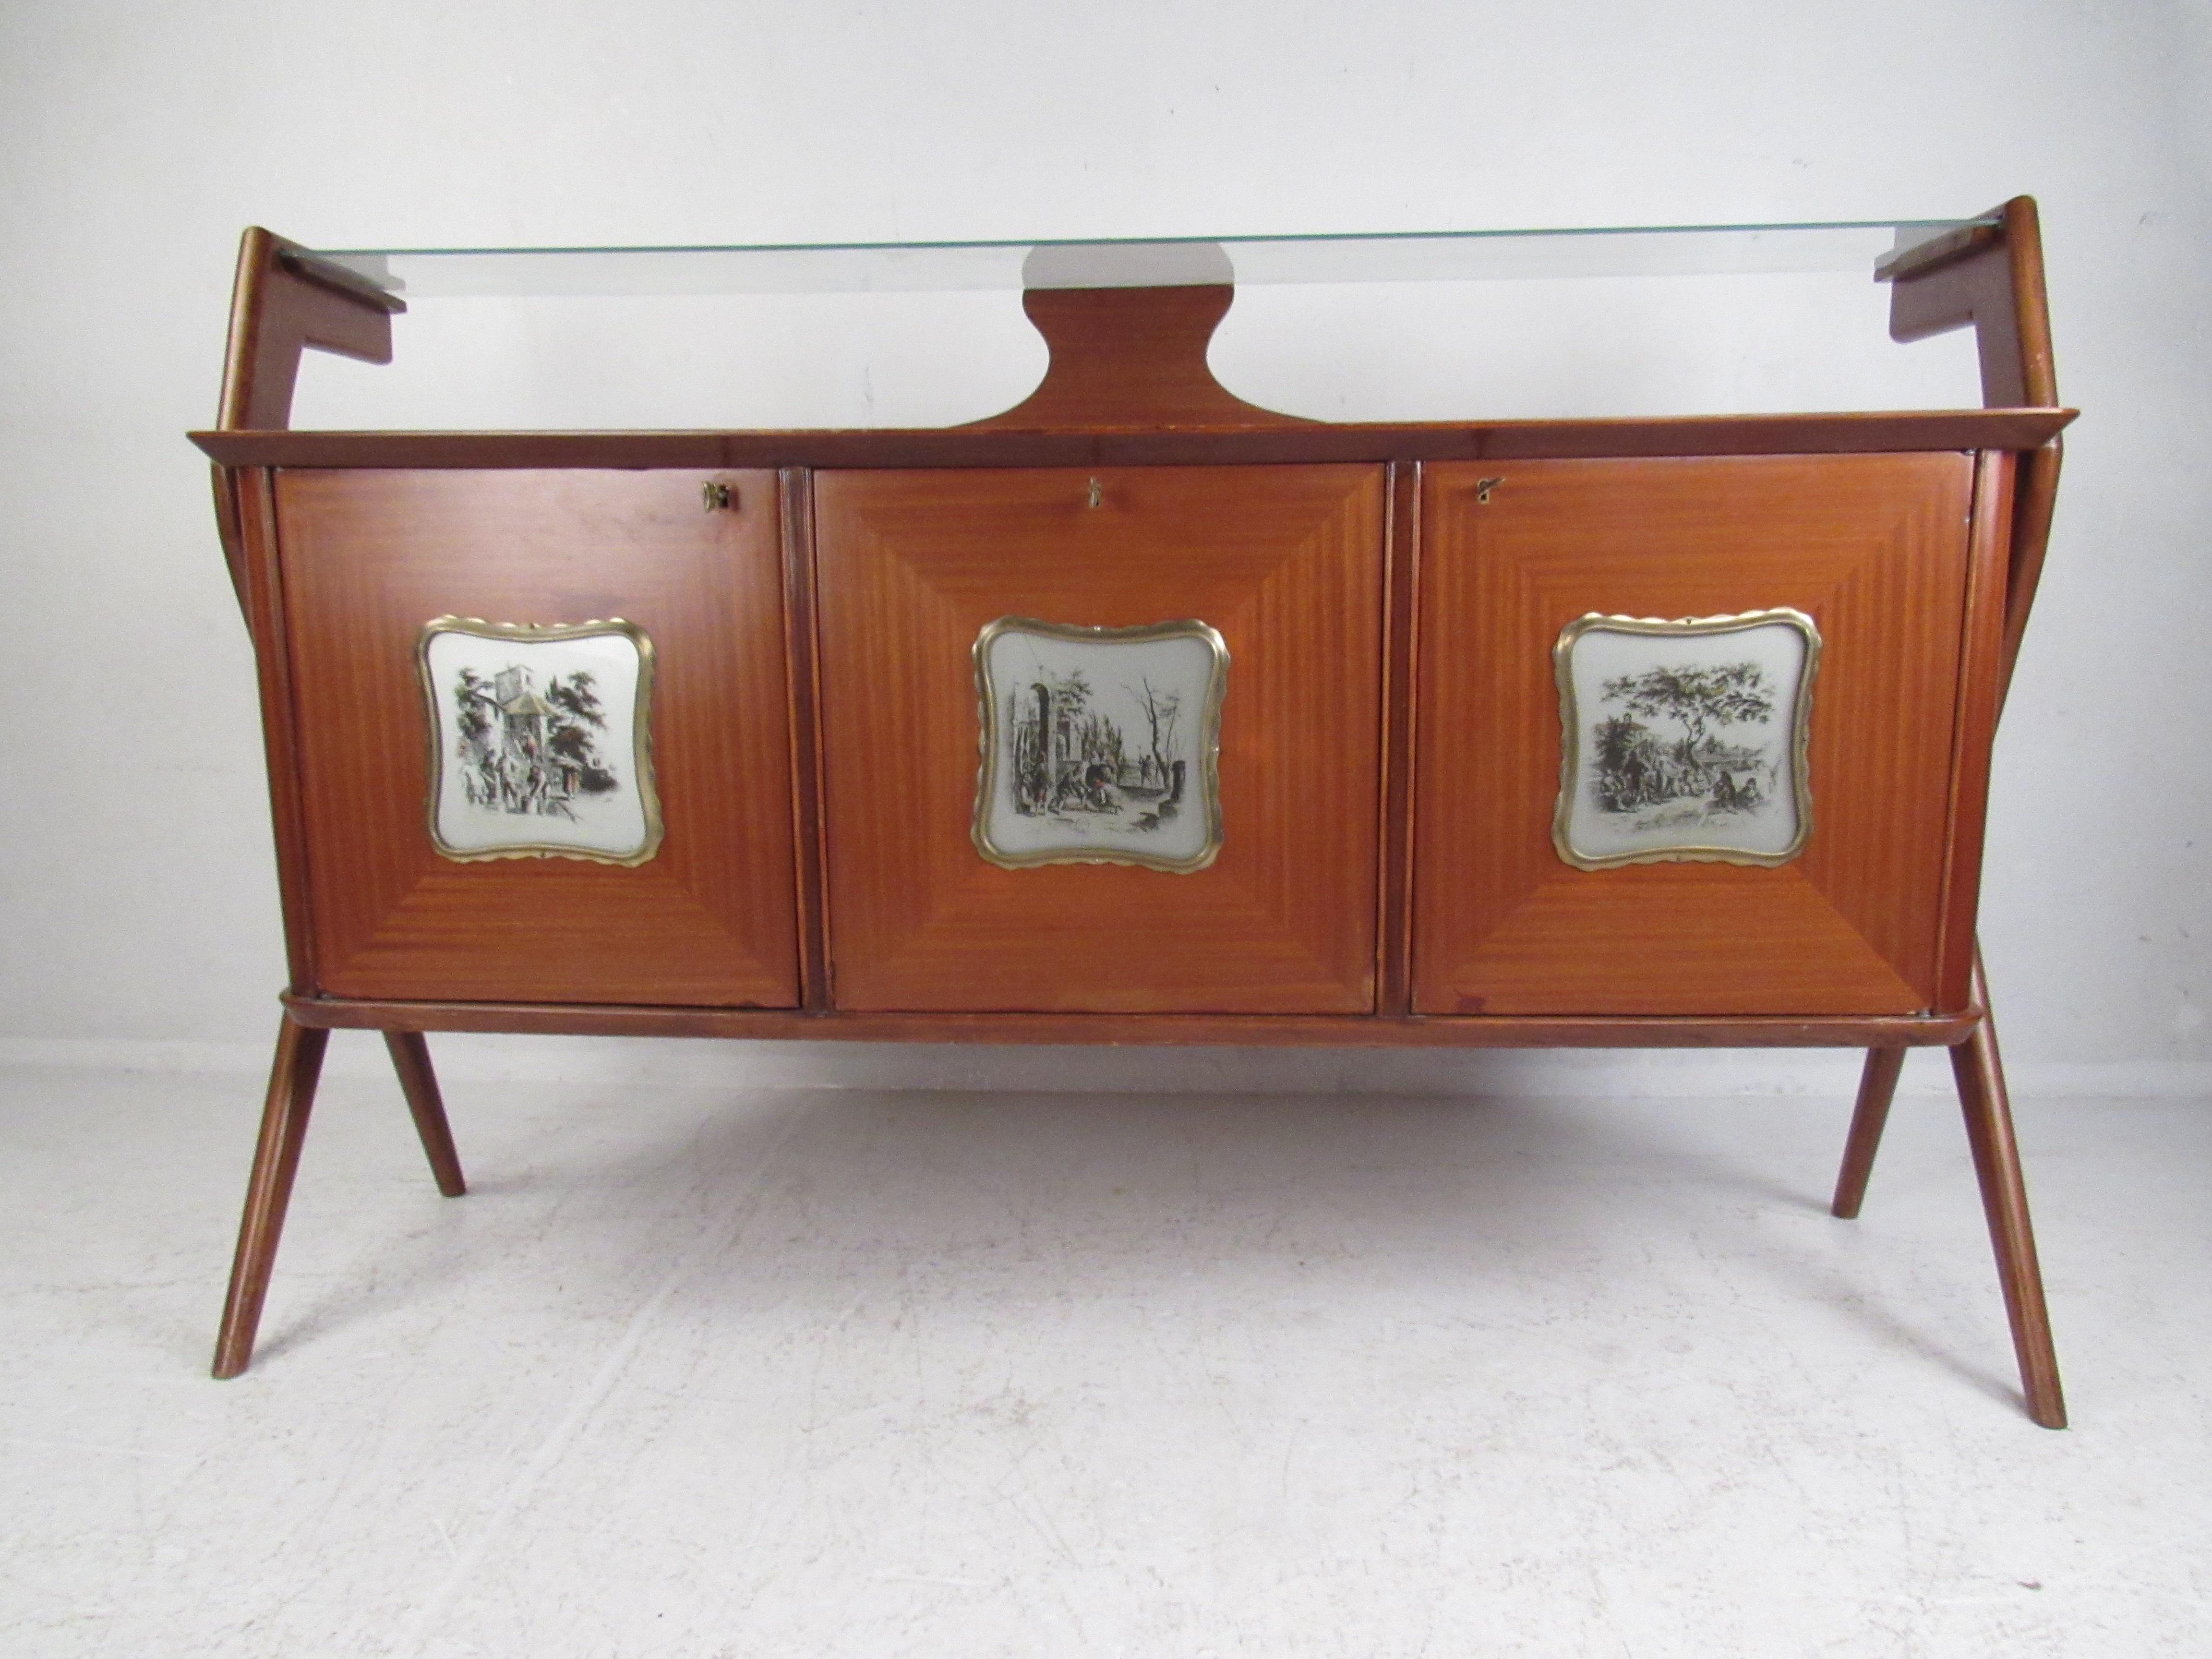 This stunning vintage modern sideboard features a floating glass top and angled legs. Sleek design with three decorative cabinet doors that depict old fashioned European scenery painted on glass fixtures. Lovely vintage finish with elegant wood